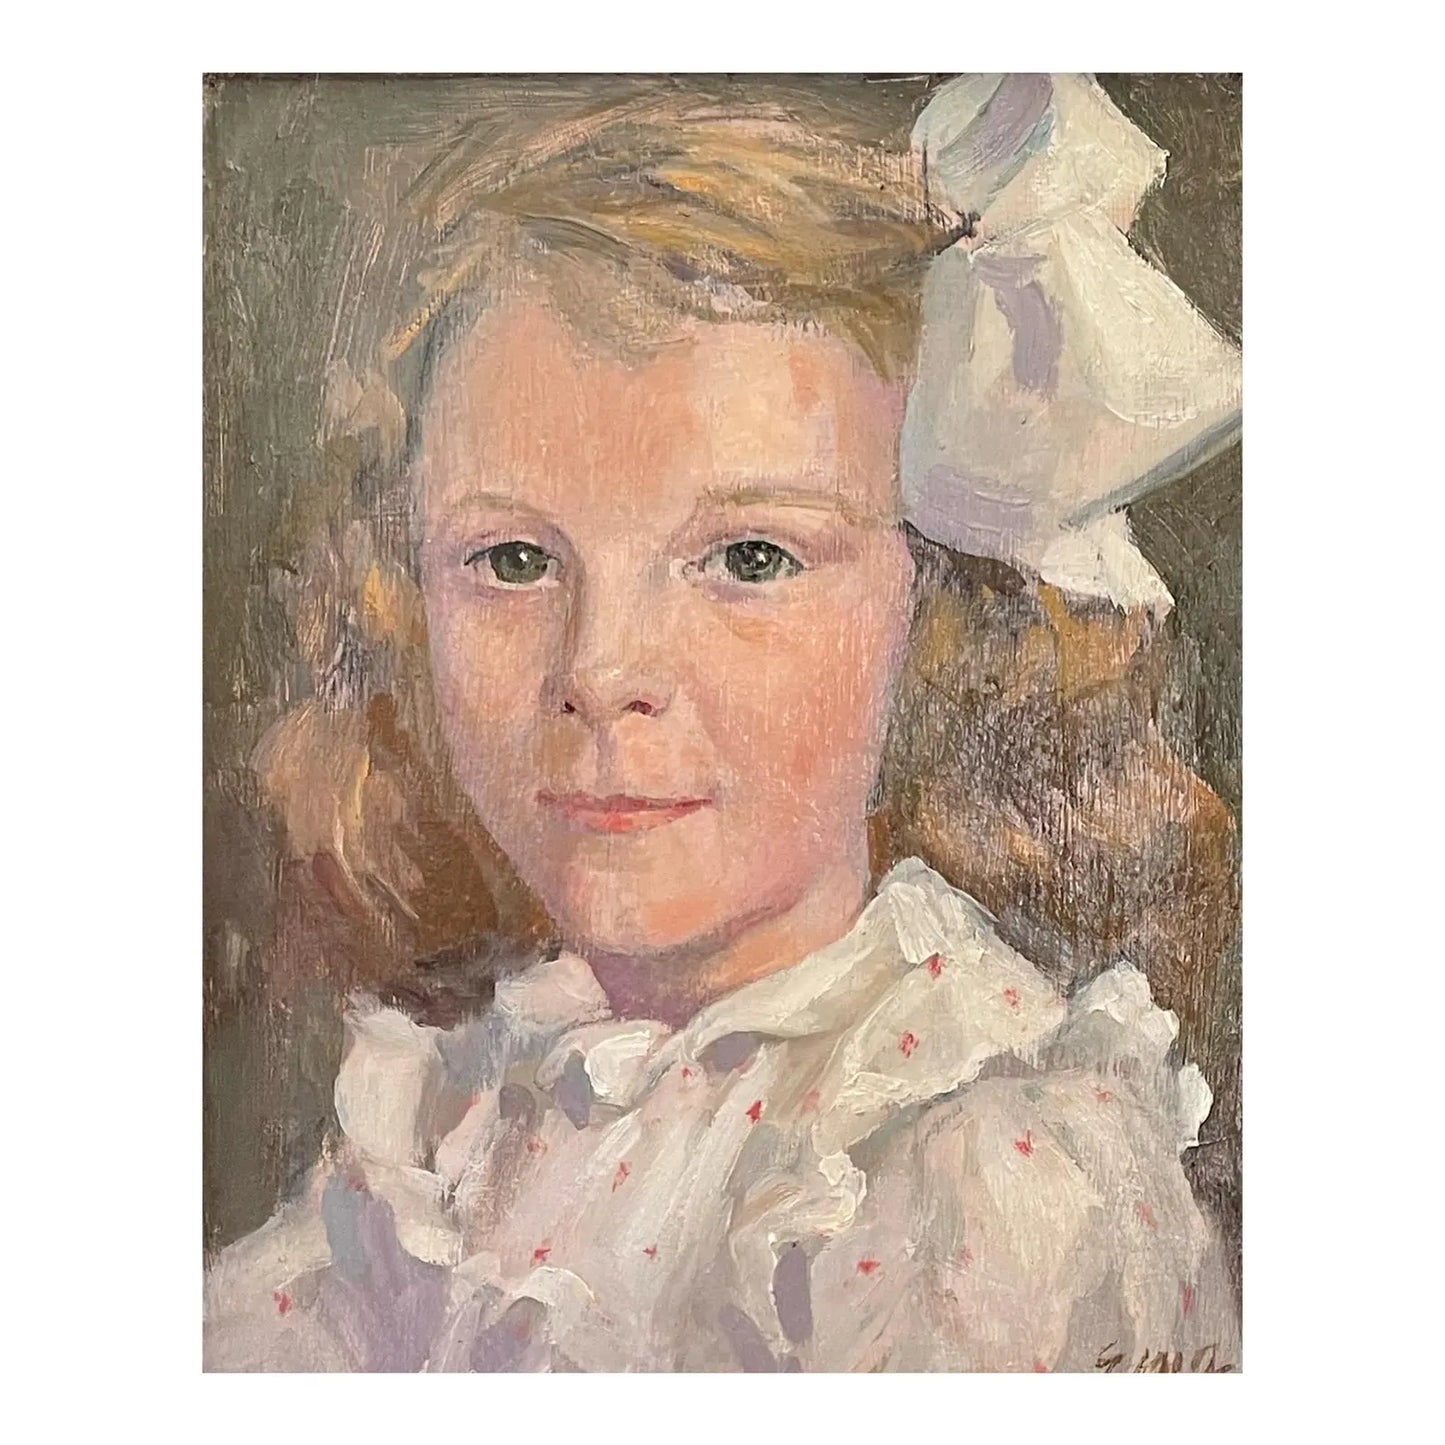 Antique Oil on Board of a Young Girl With a Bow in Her Hair in a Gorgeous Frame